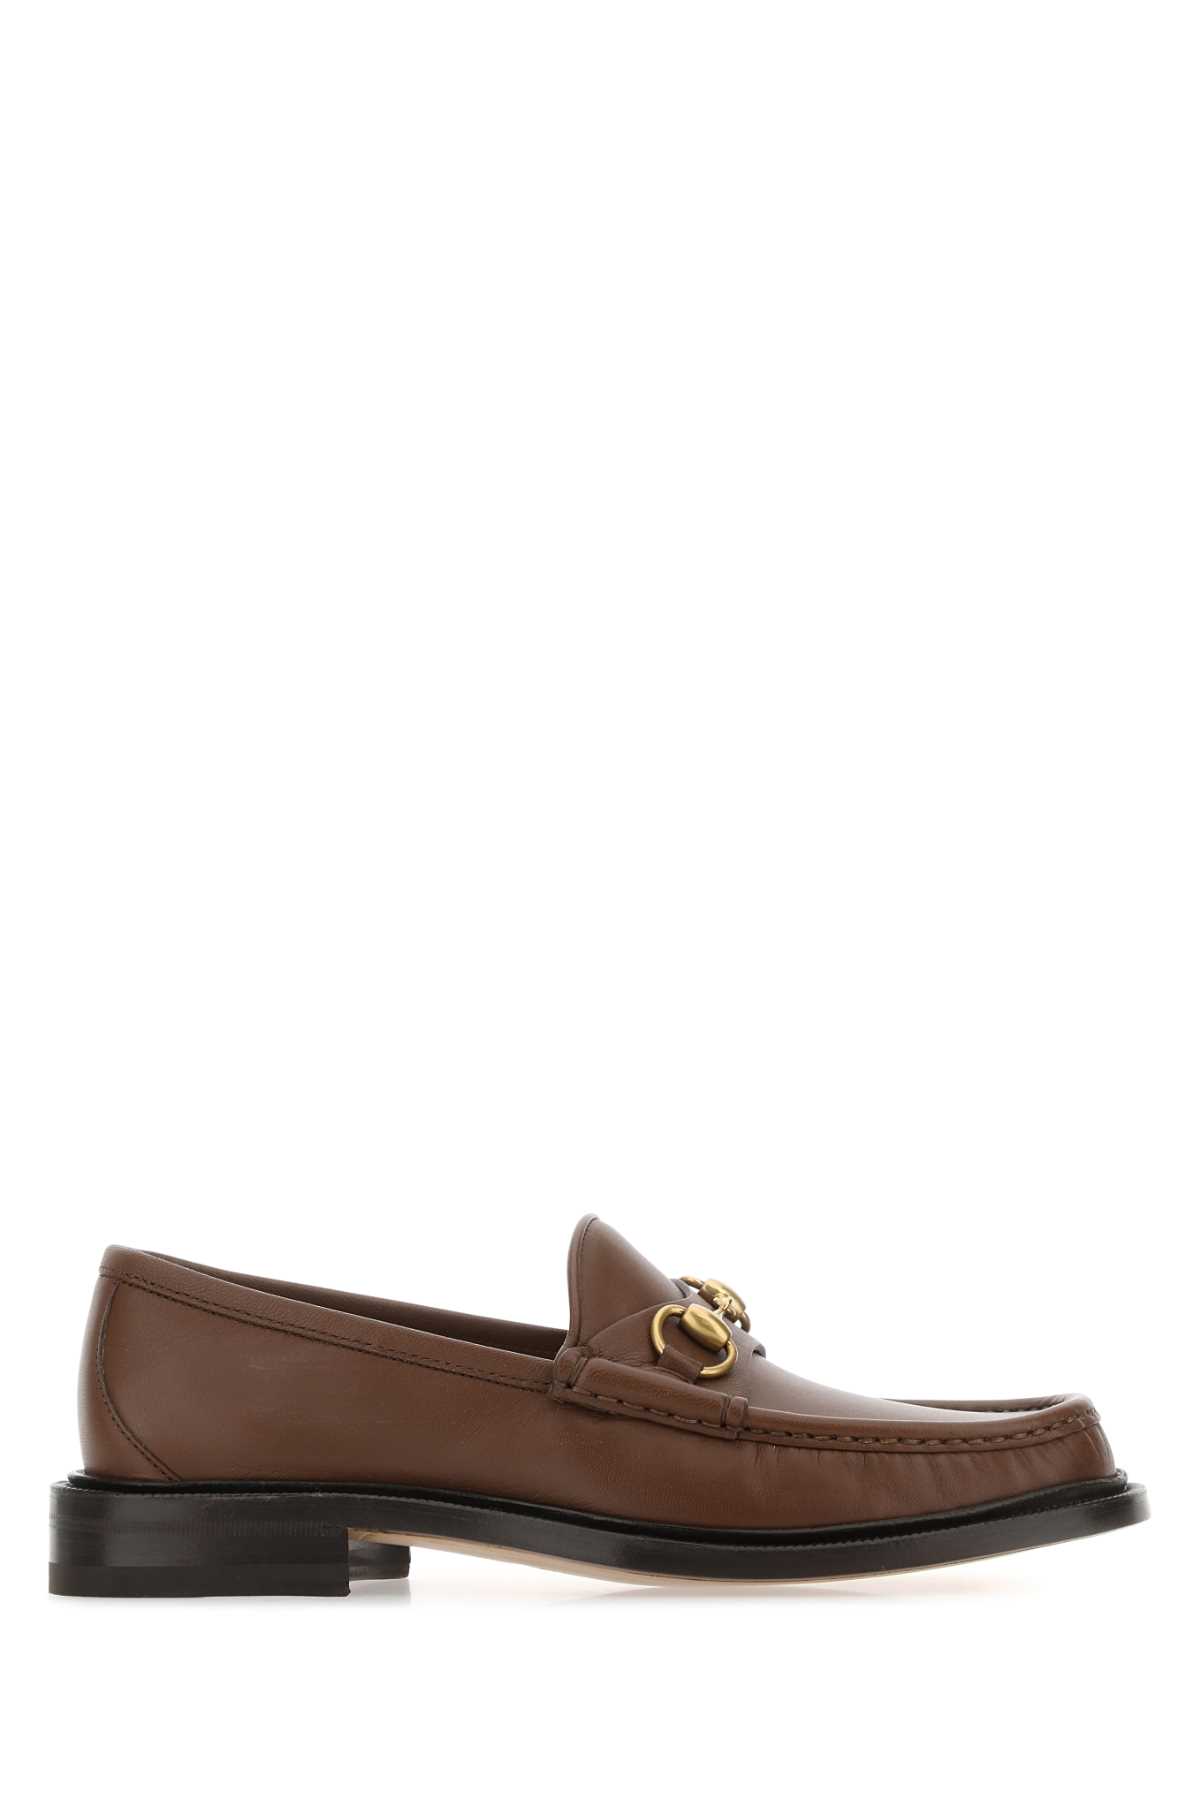 Gucci Brown Leather Loafers